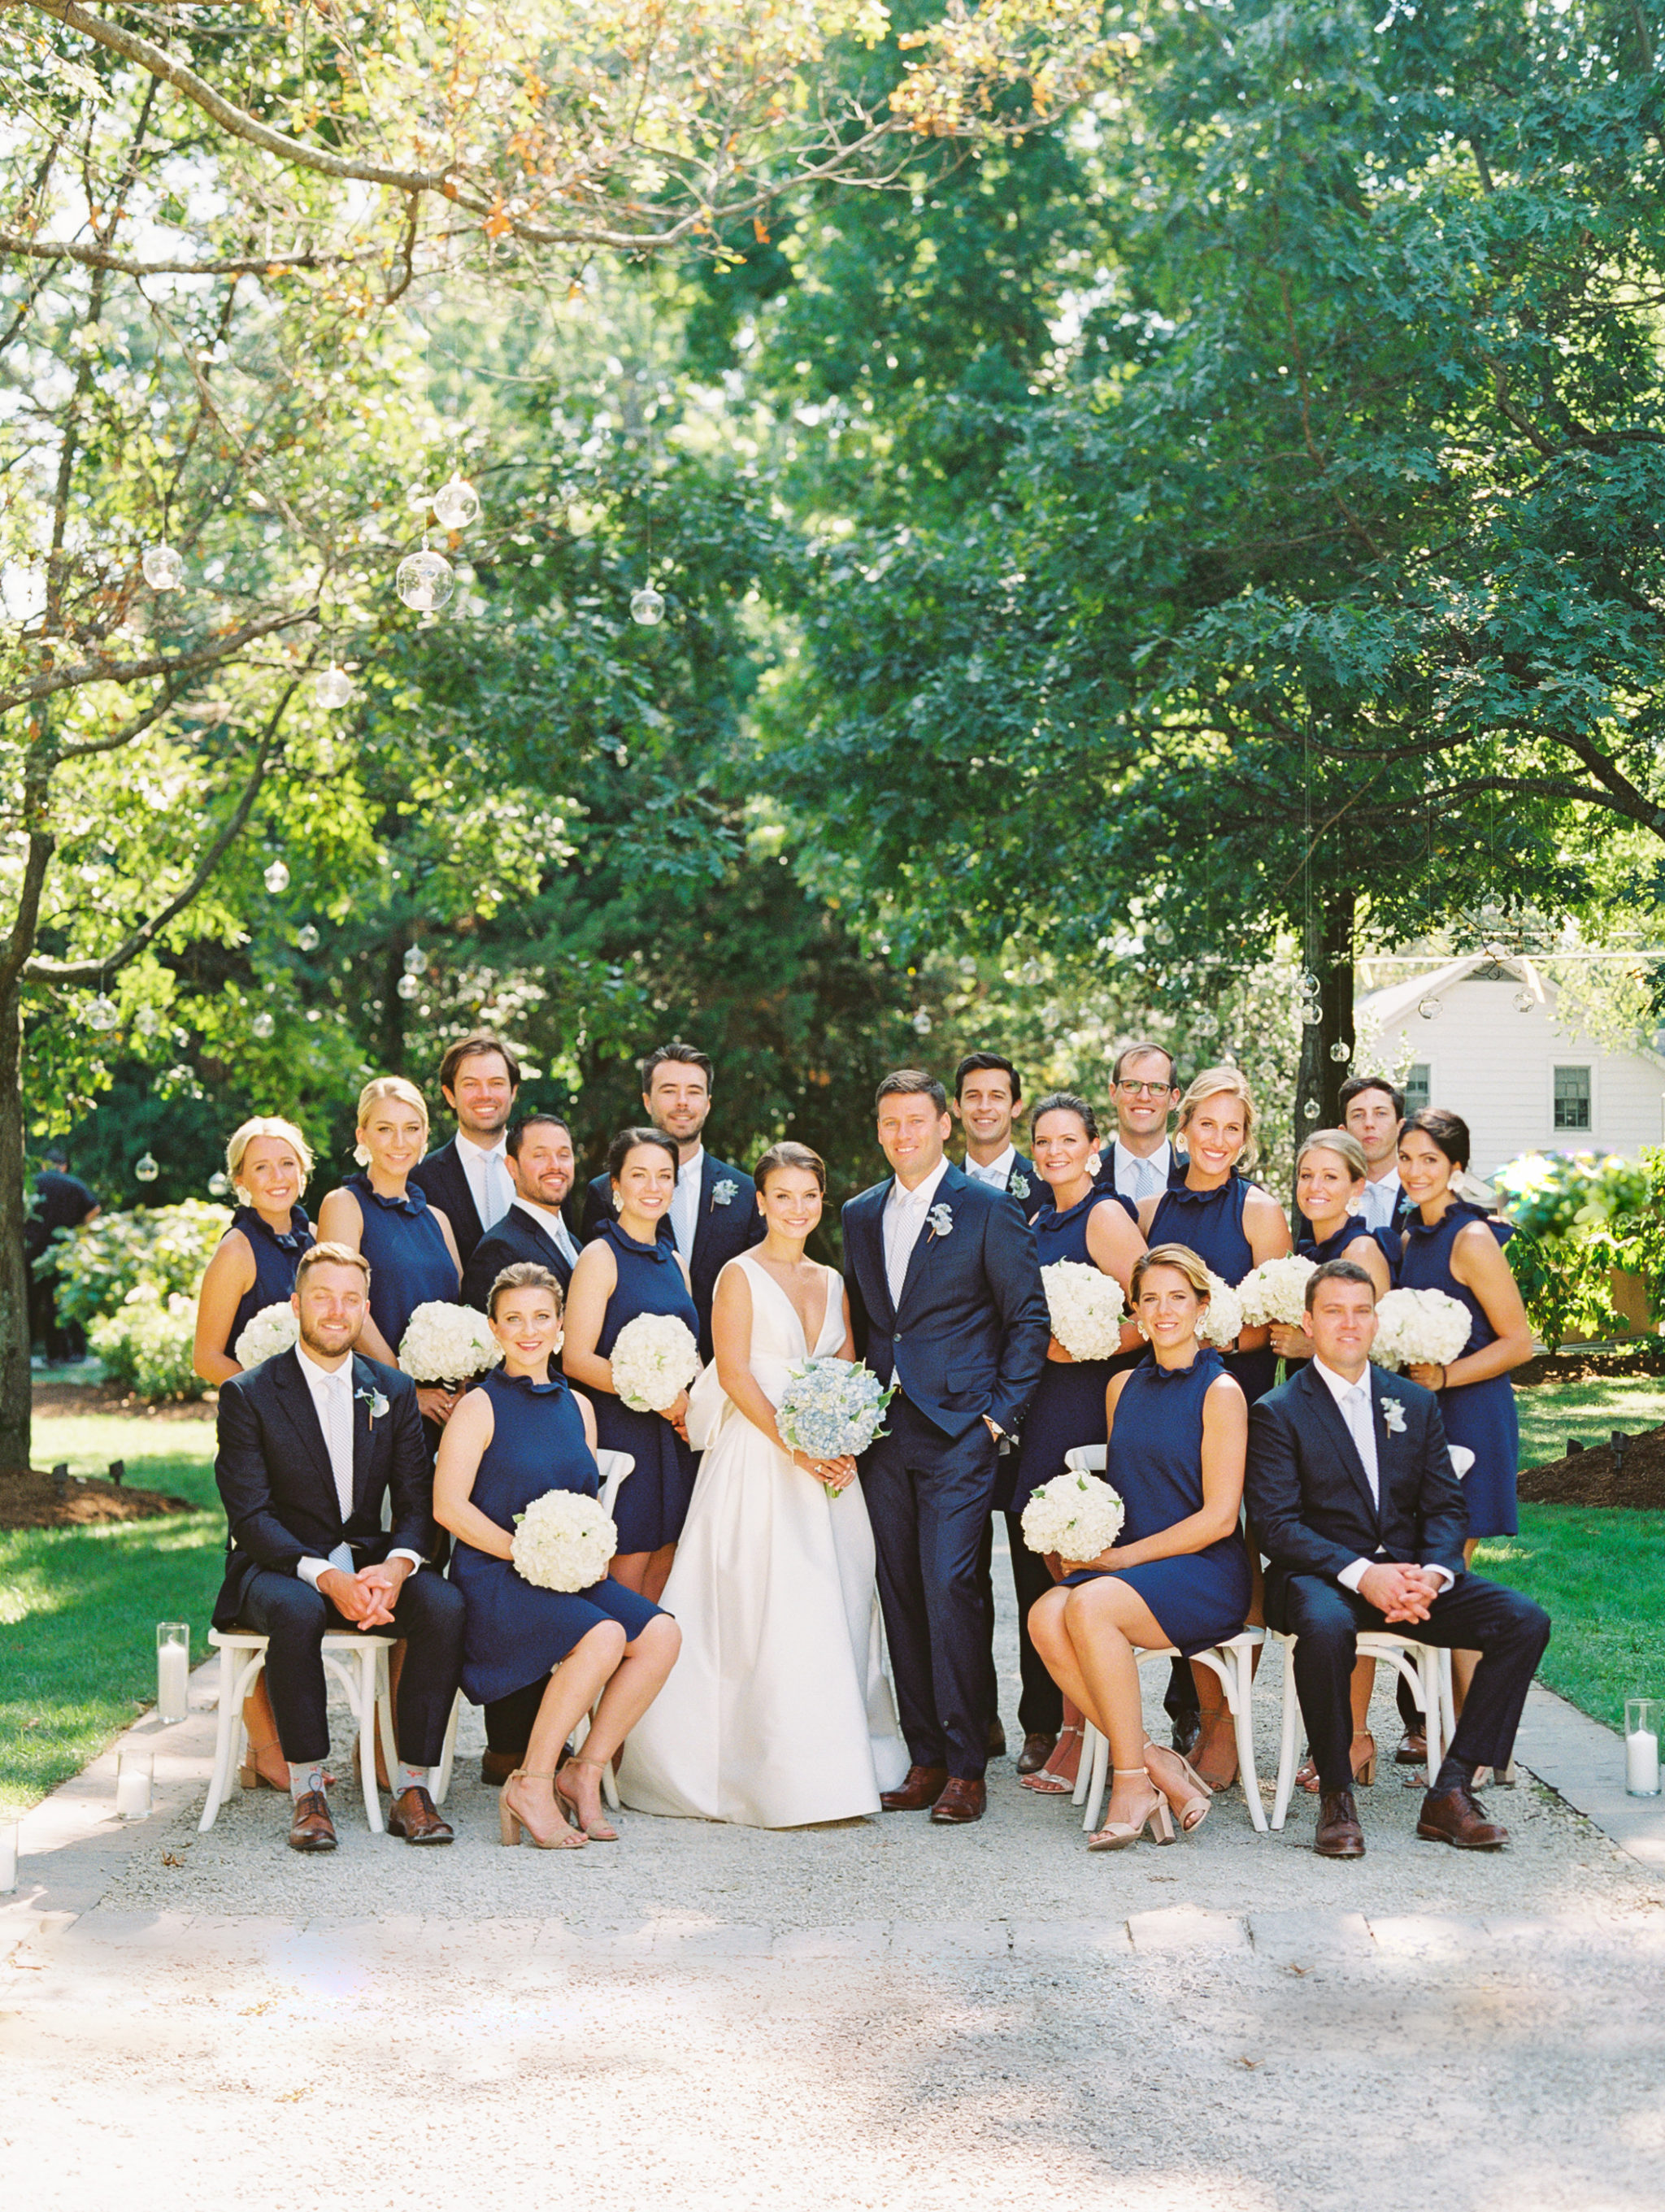 A Chic Coastal Wedding With Blue Accents in Southampton, New York